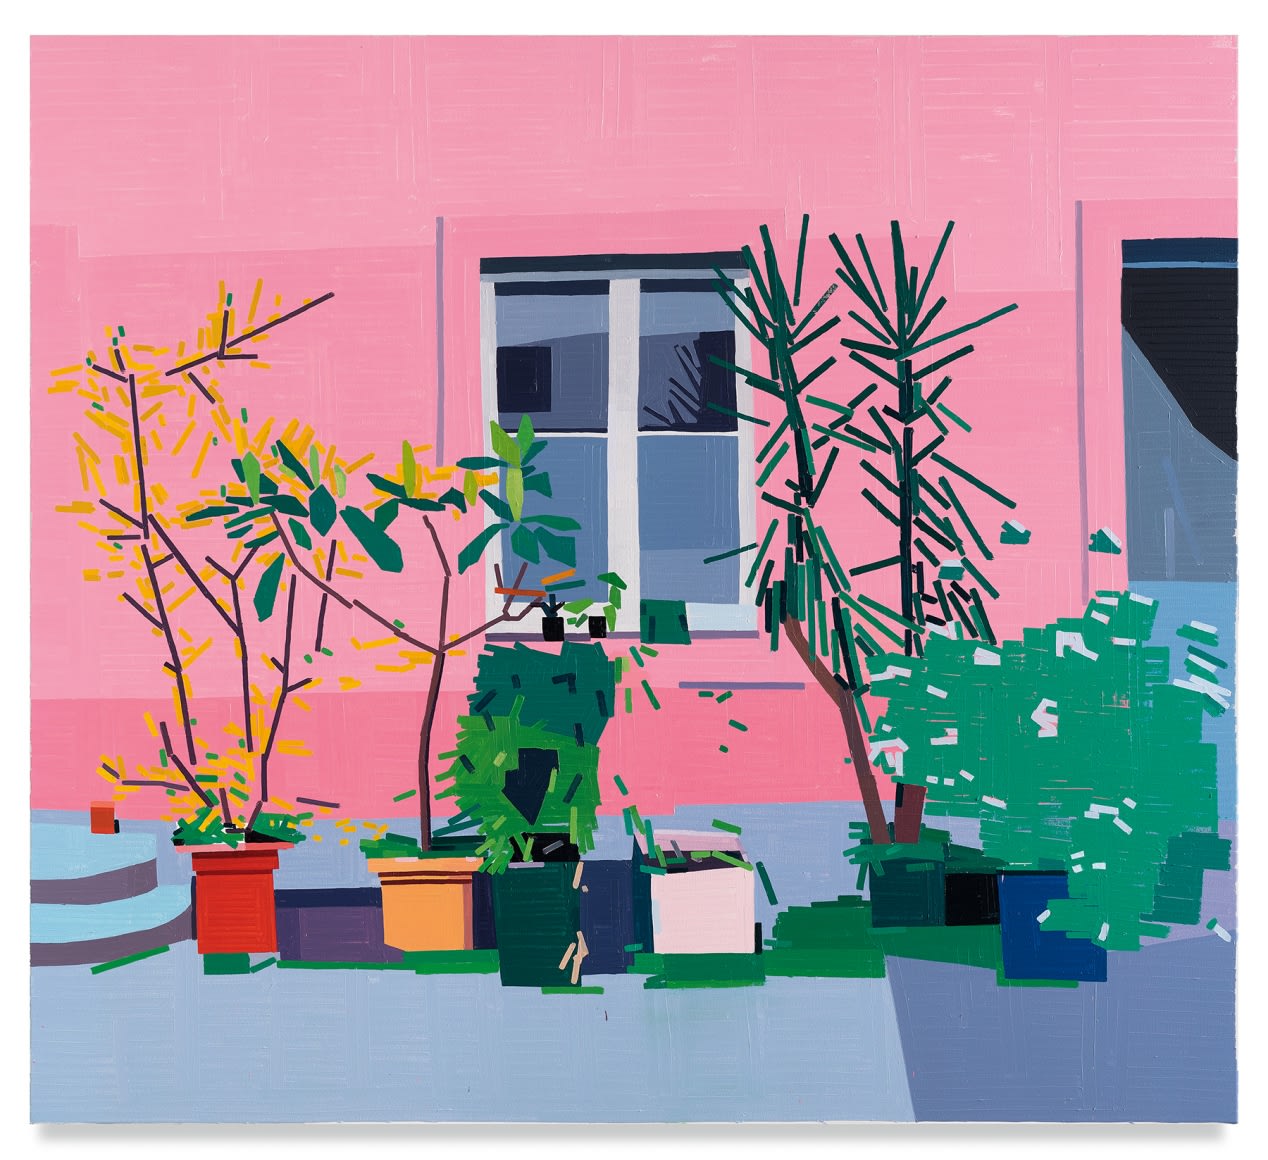 Sun-Drenched Domestic Environments Built From Carefully Painted Straight Lines by Guy Yanai — Colossal